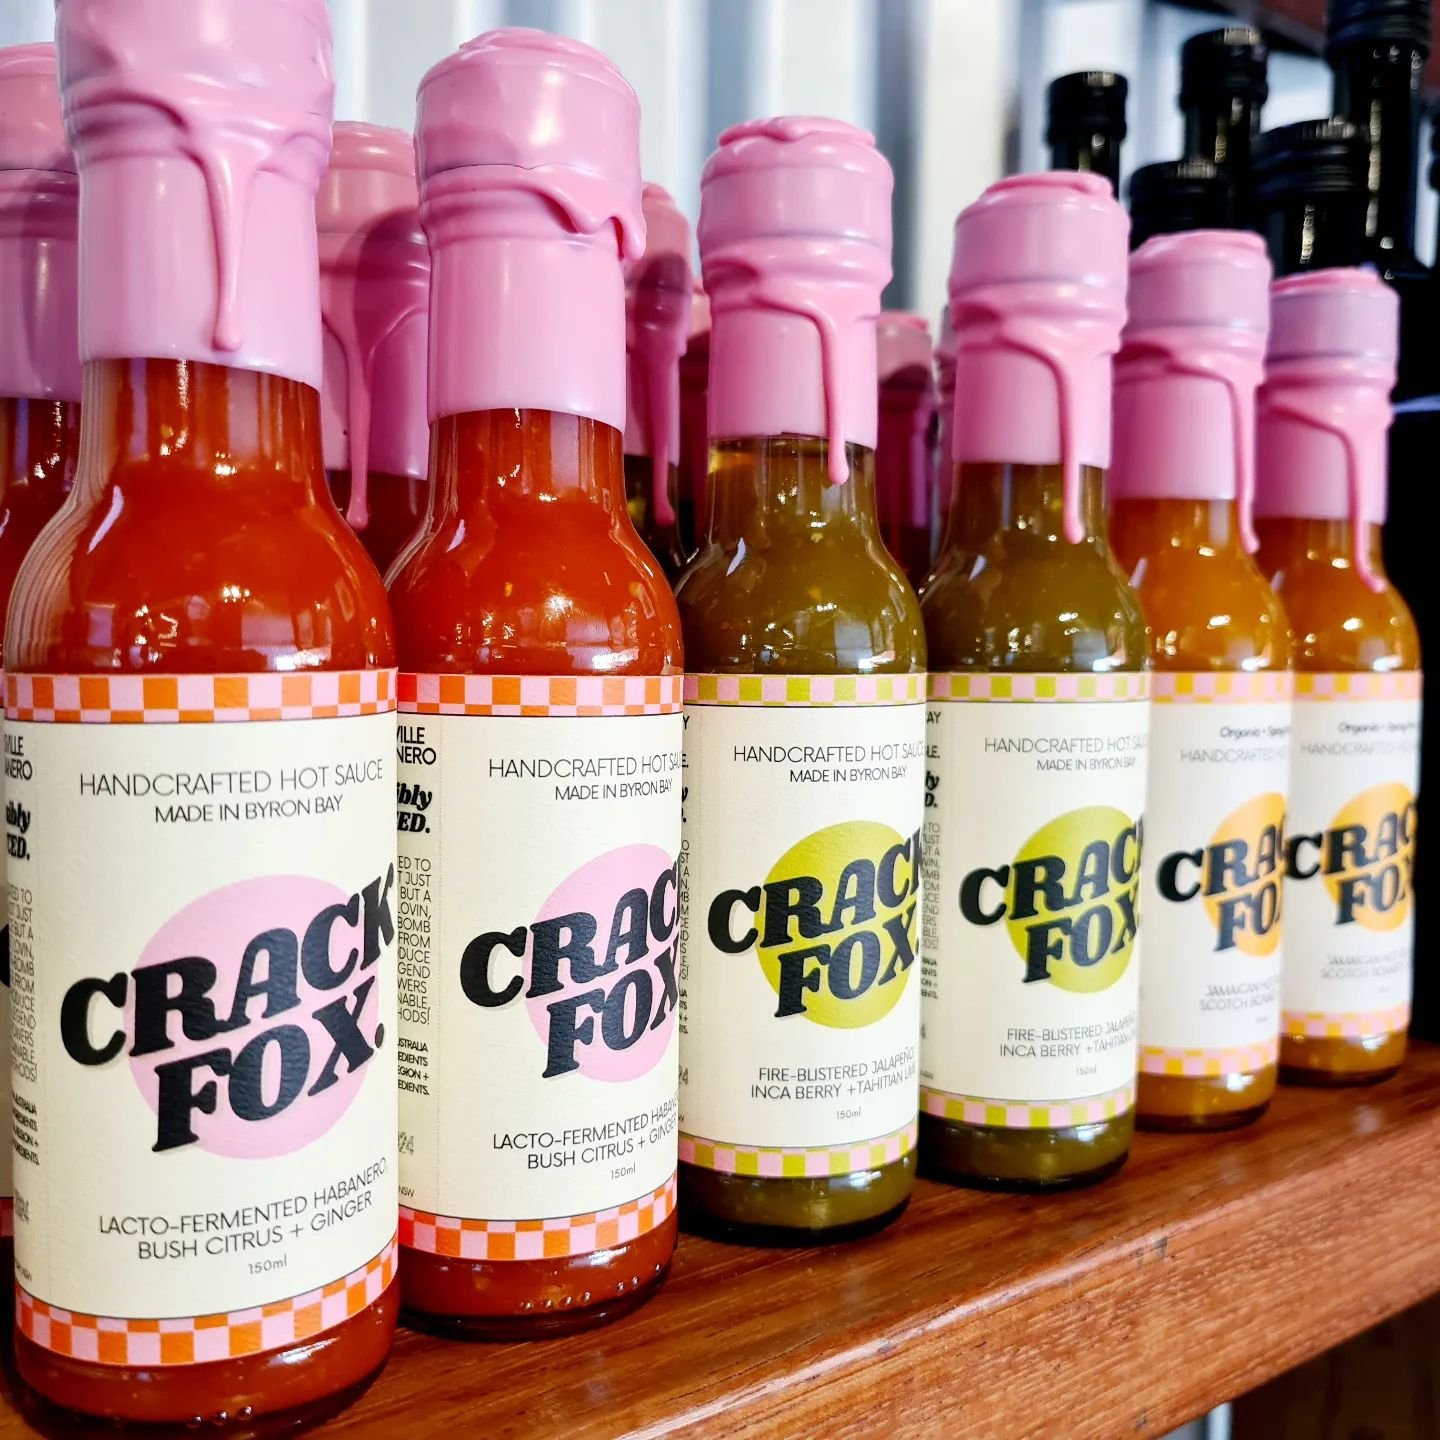 Spice up your life (or someone else's!) with this great range of hot sauces, made by our neighbours (a bit further up the road!) in Byron Bay. Crack Fox's tasty chillies are grown in their pesticide-free permaculture garden, and their pretty packagin